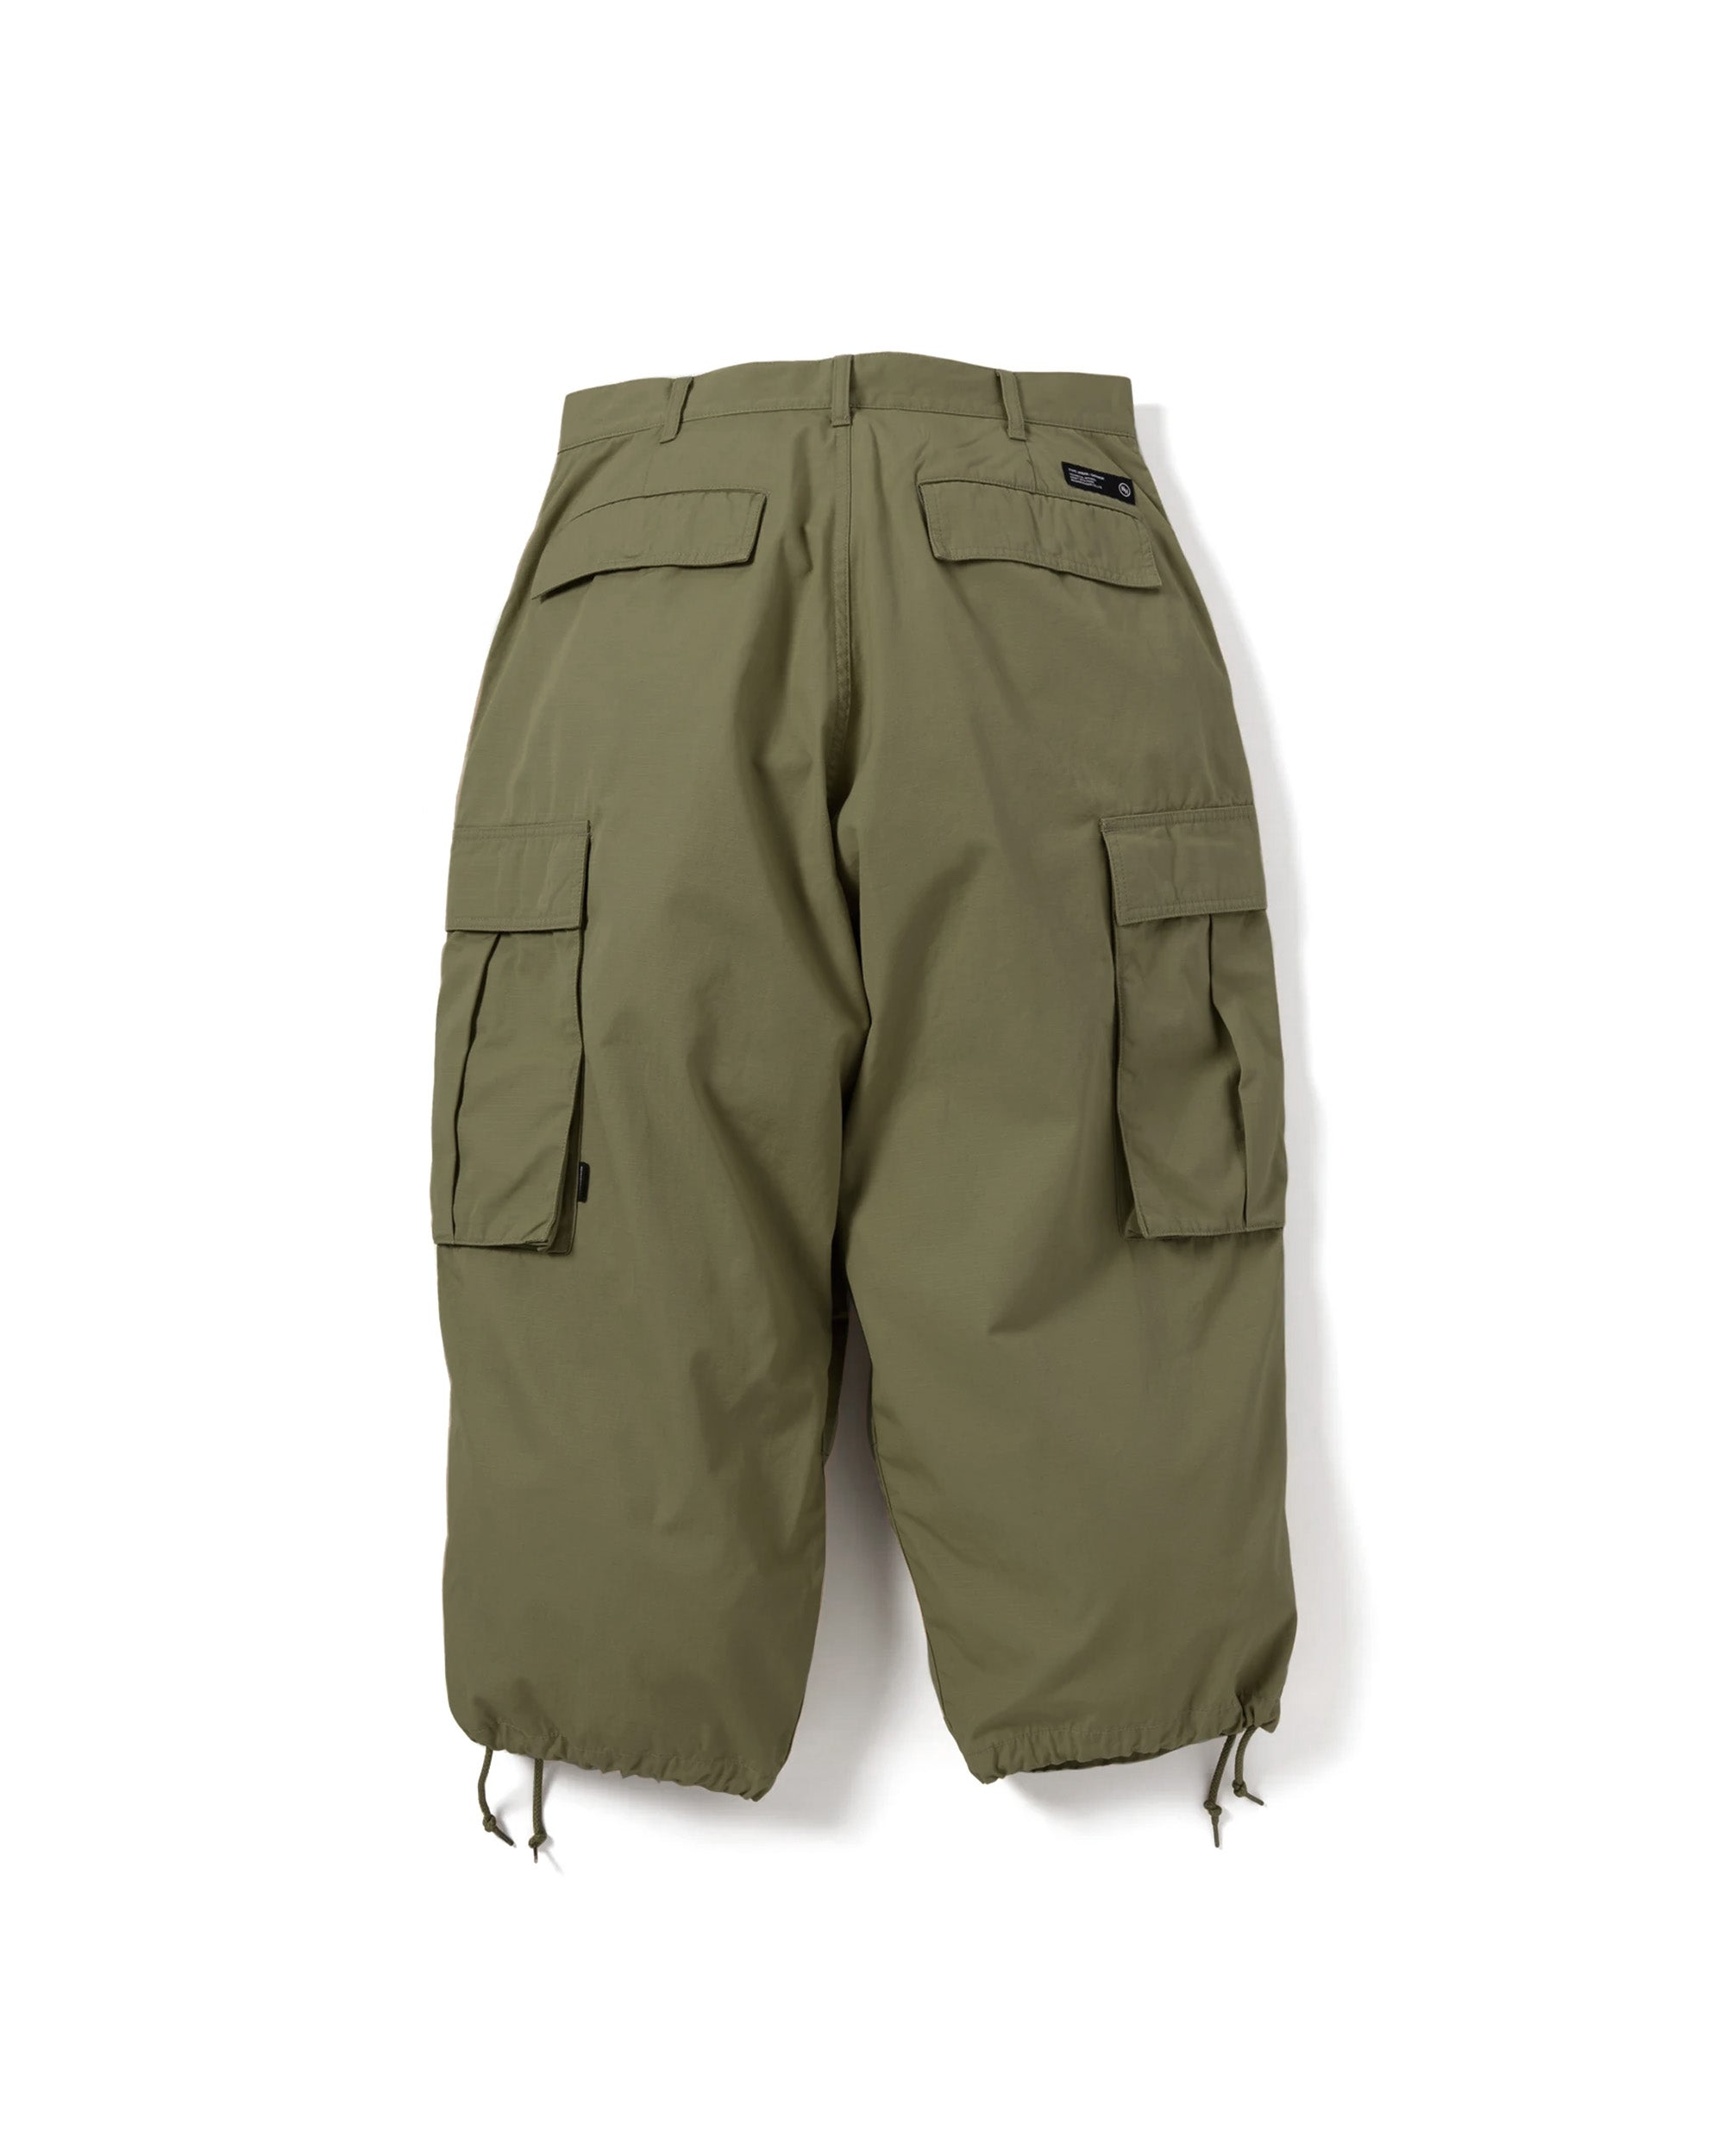 Wide Cargo Pants - Olive Drab